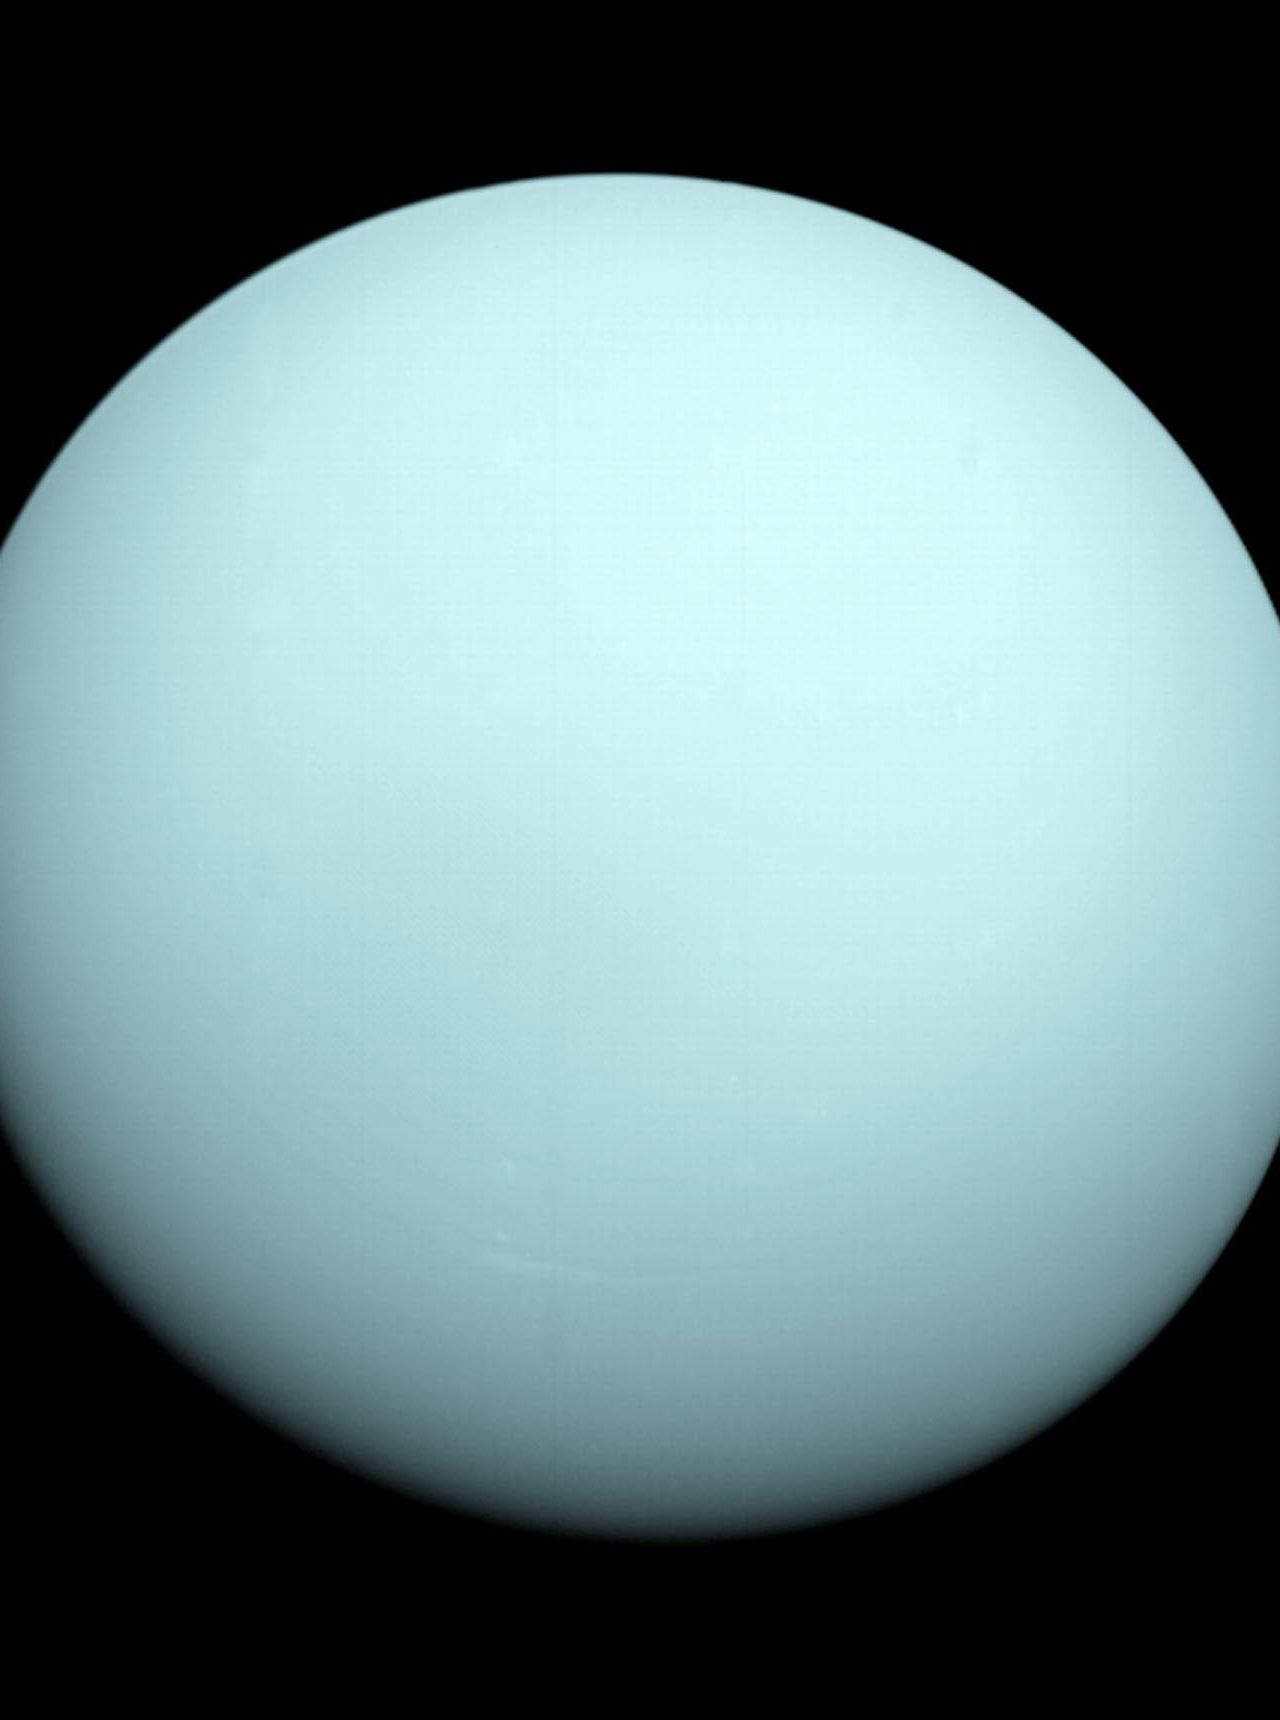 <p><span>Voyager 2 did help reveal some interesting facts about Uranus and the moons that orbit the planet according to Smithsonian Magazine. For example, researchers predicted at least five of Uranus’ moons likely were home to hidden oceans. </span></p> <p>Photo Credit: NASA/JPL-Caltech</p>